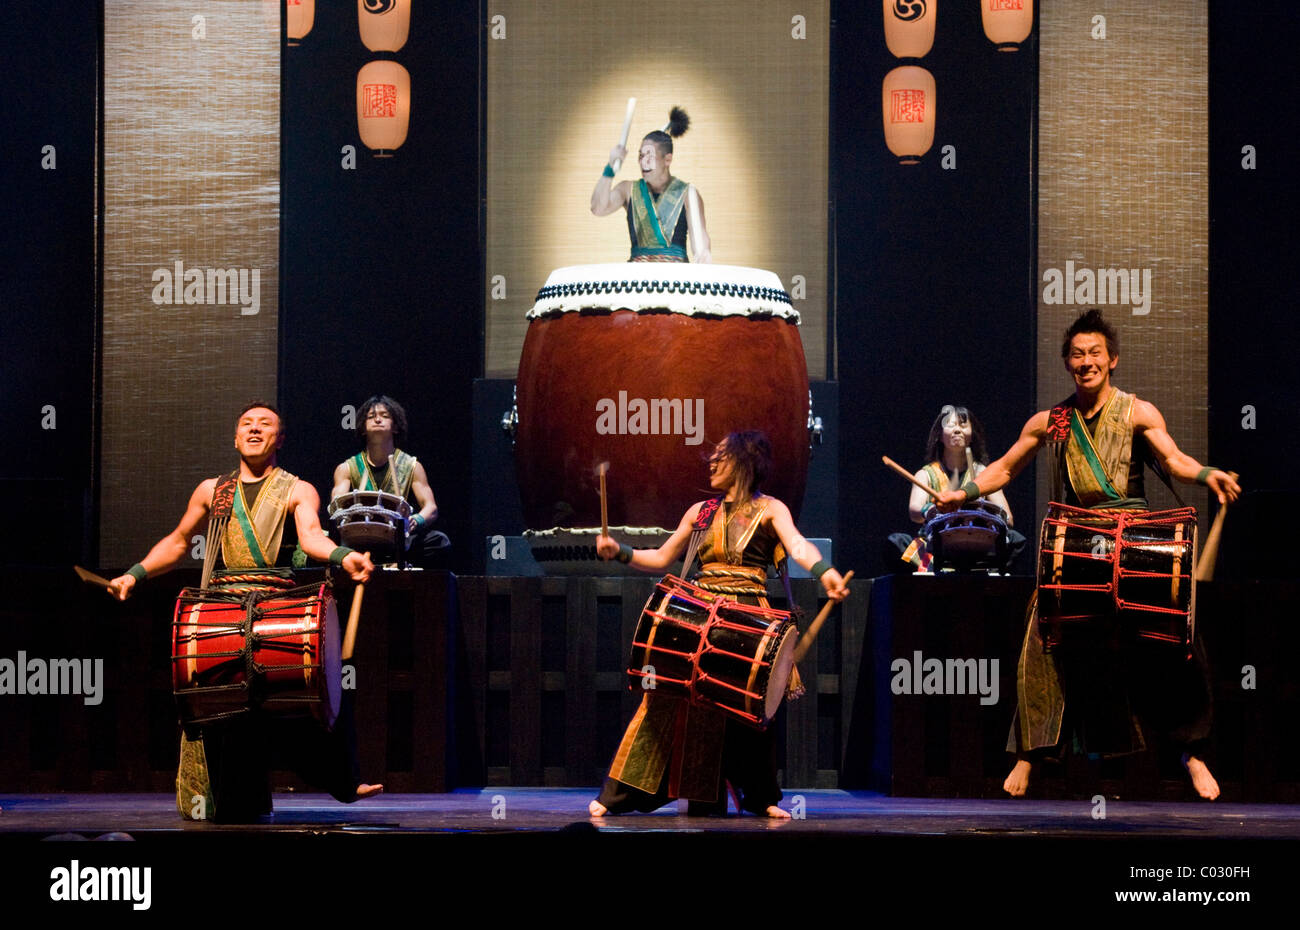 Yamato - The Drummers of Japan performing the program Matsuri, concert in the Circus Krone building, Munich, Bavaria Stock Photo